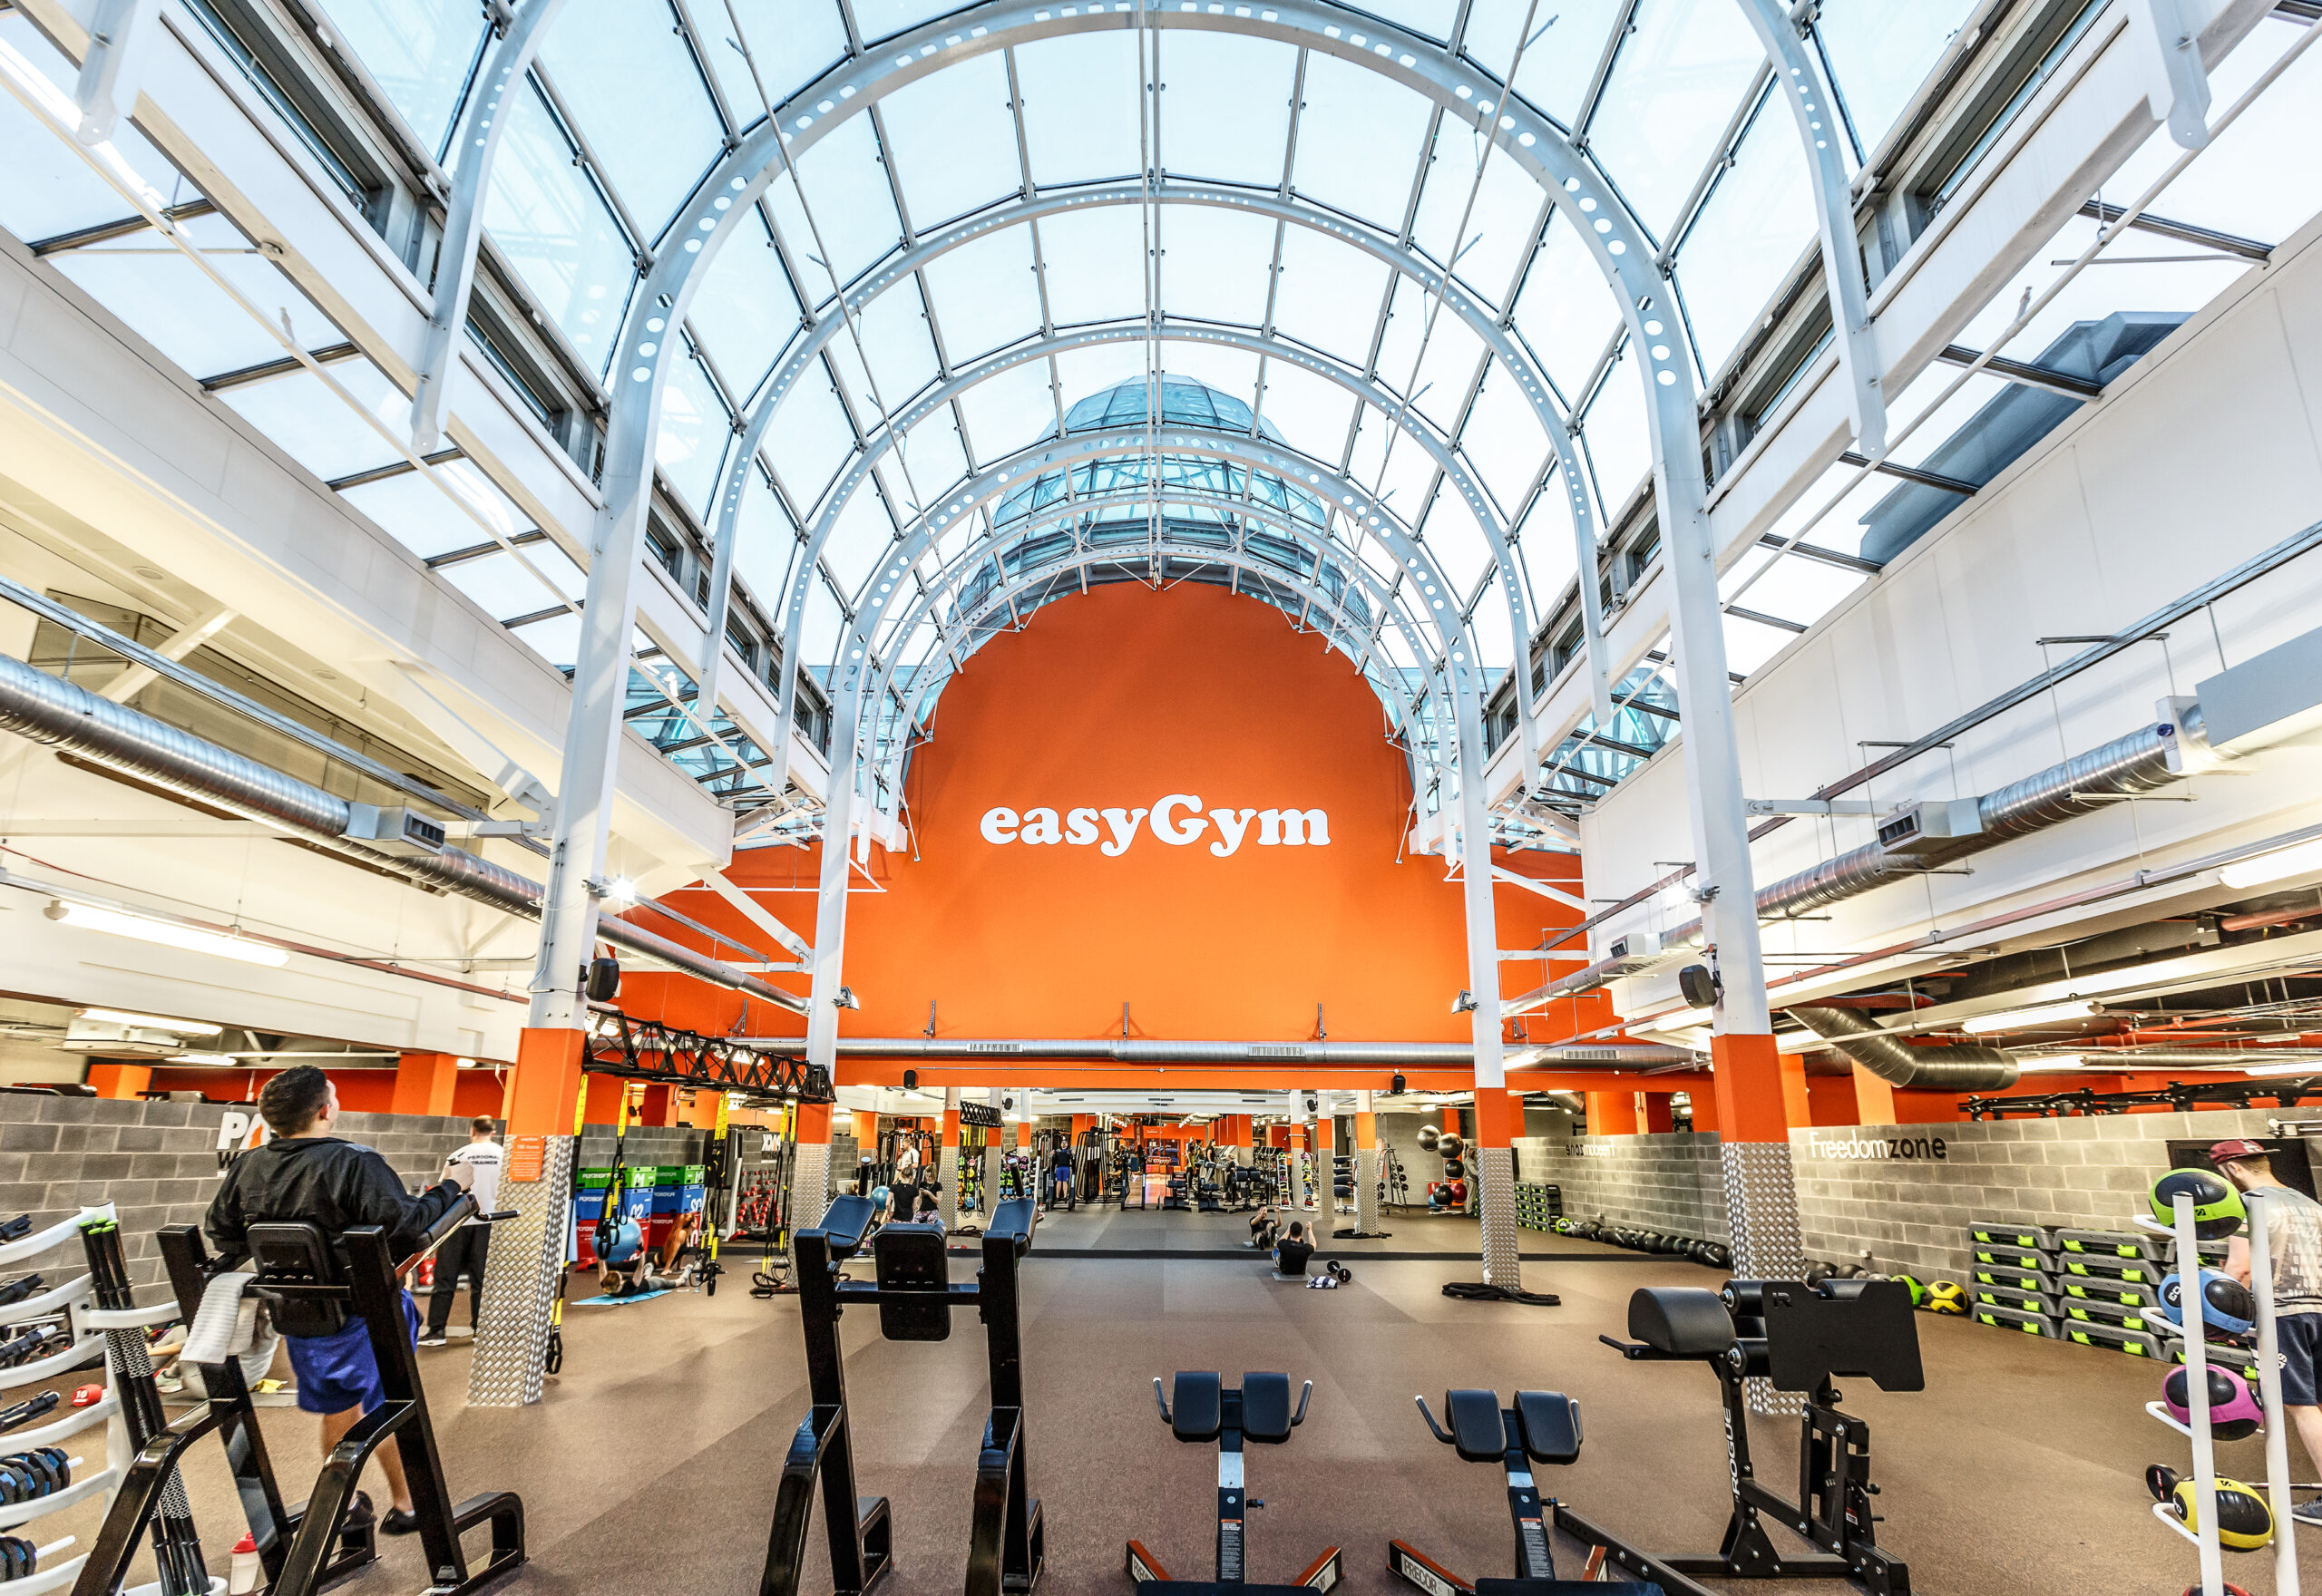 https://www.easygym.co.uk/wp-content/uploads/2021/08/160223_A4_EASYGYM_3538-scaled.jpg